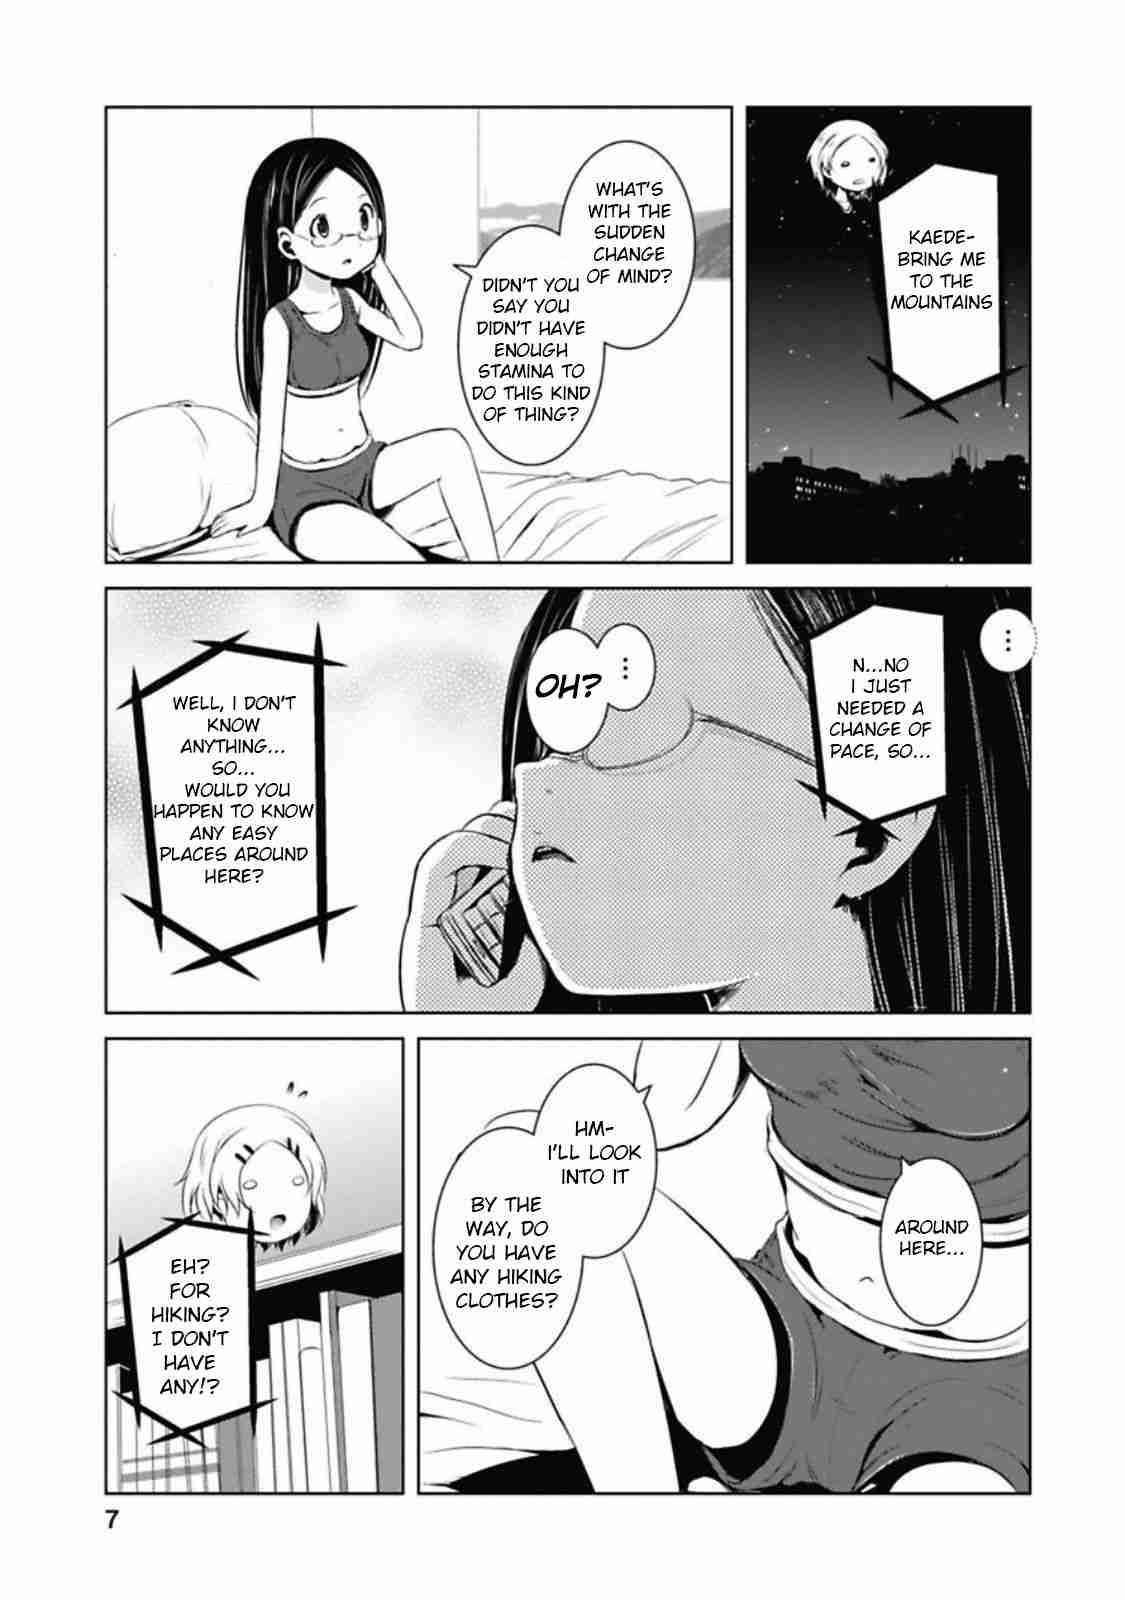 Yama No Susume Vol. 5 Ch. 33 I Can't Use My Gym Clothes?